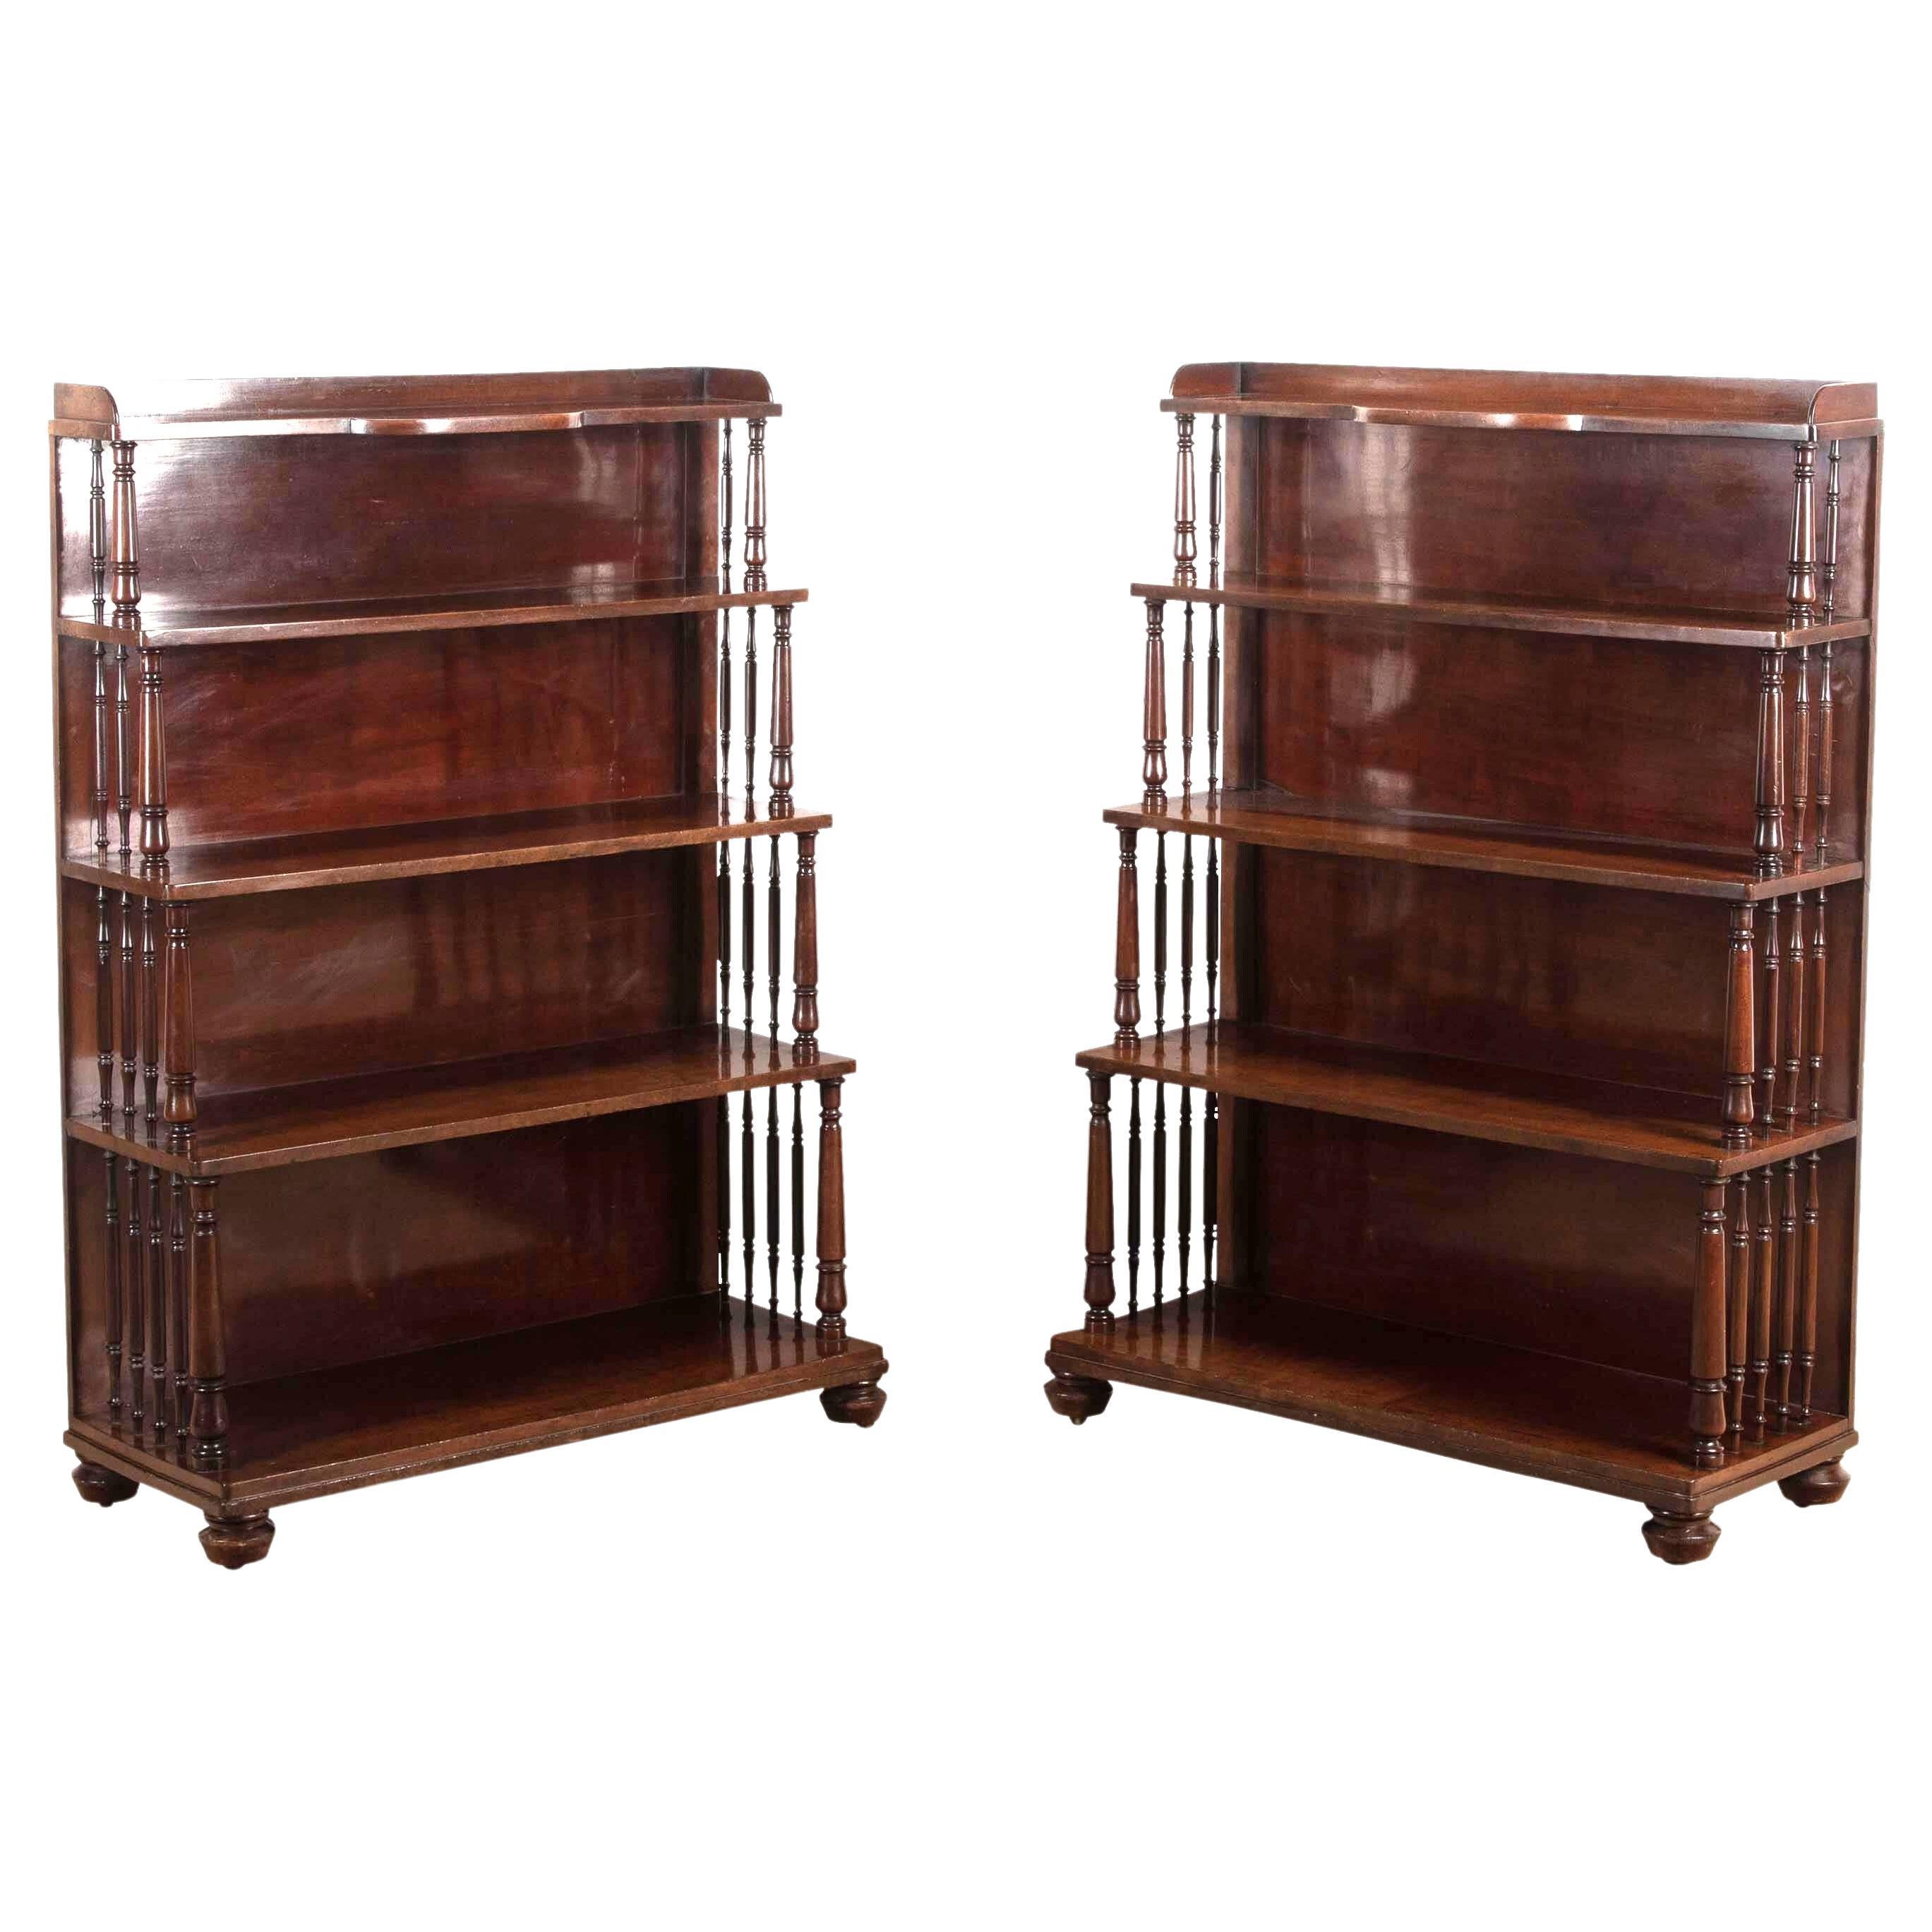 Pair of 19th Century Regency Mahogany Waterfall Bookcases For Sale